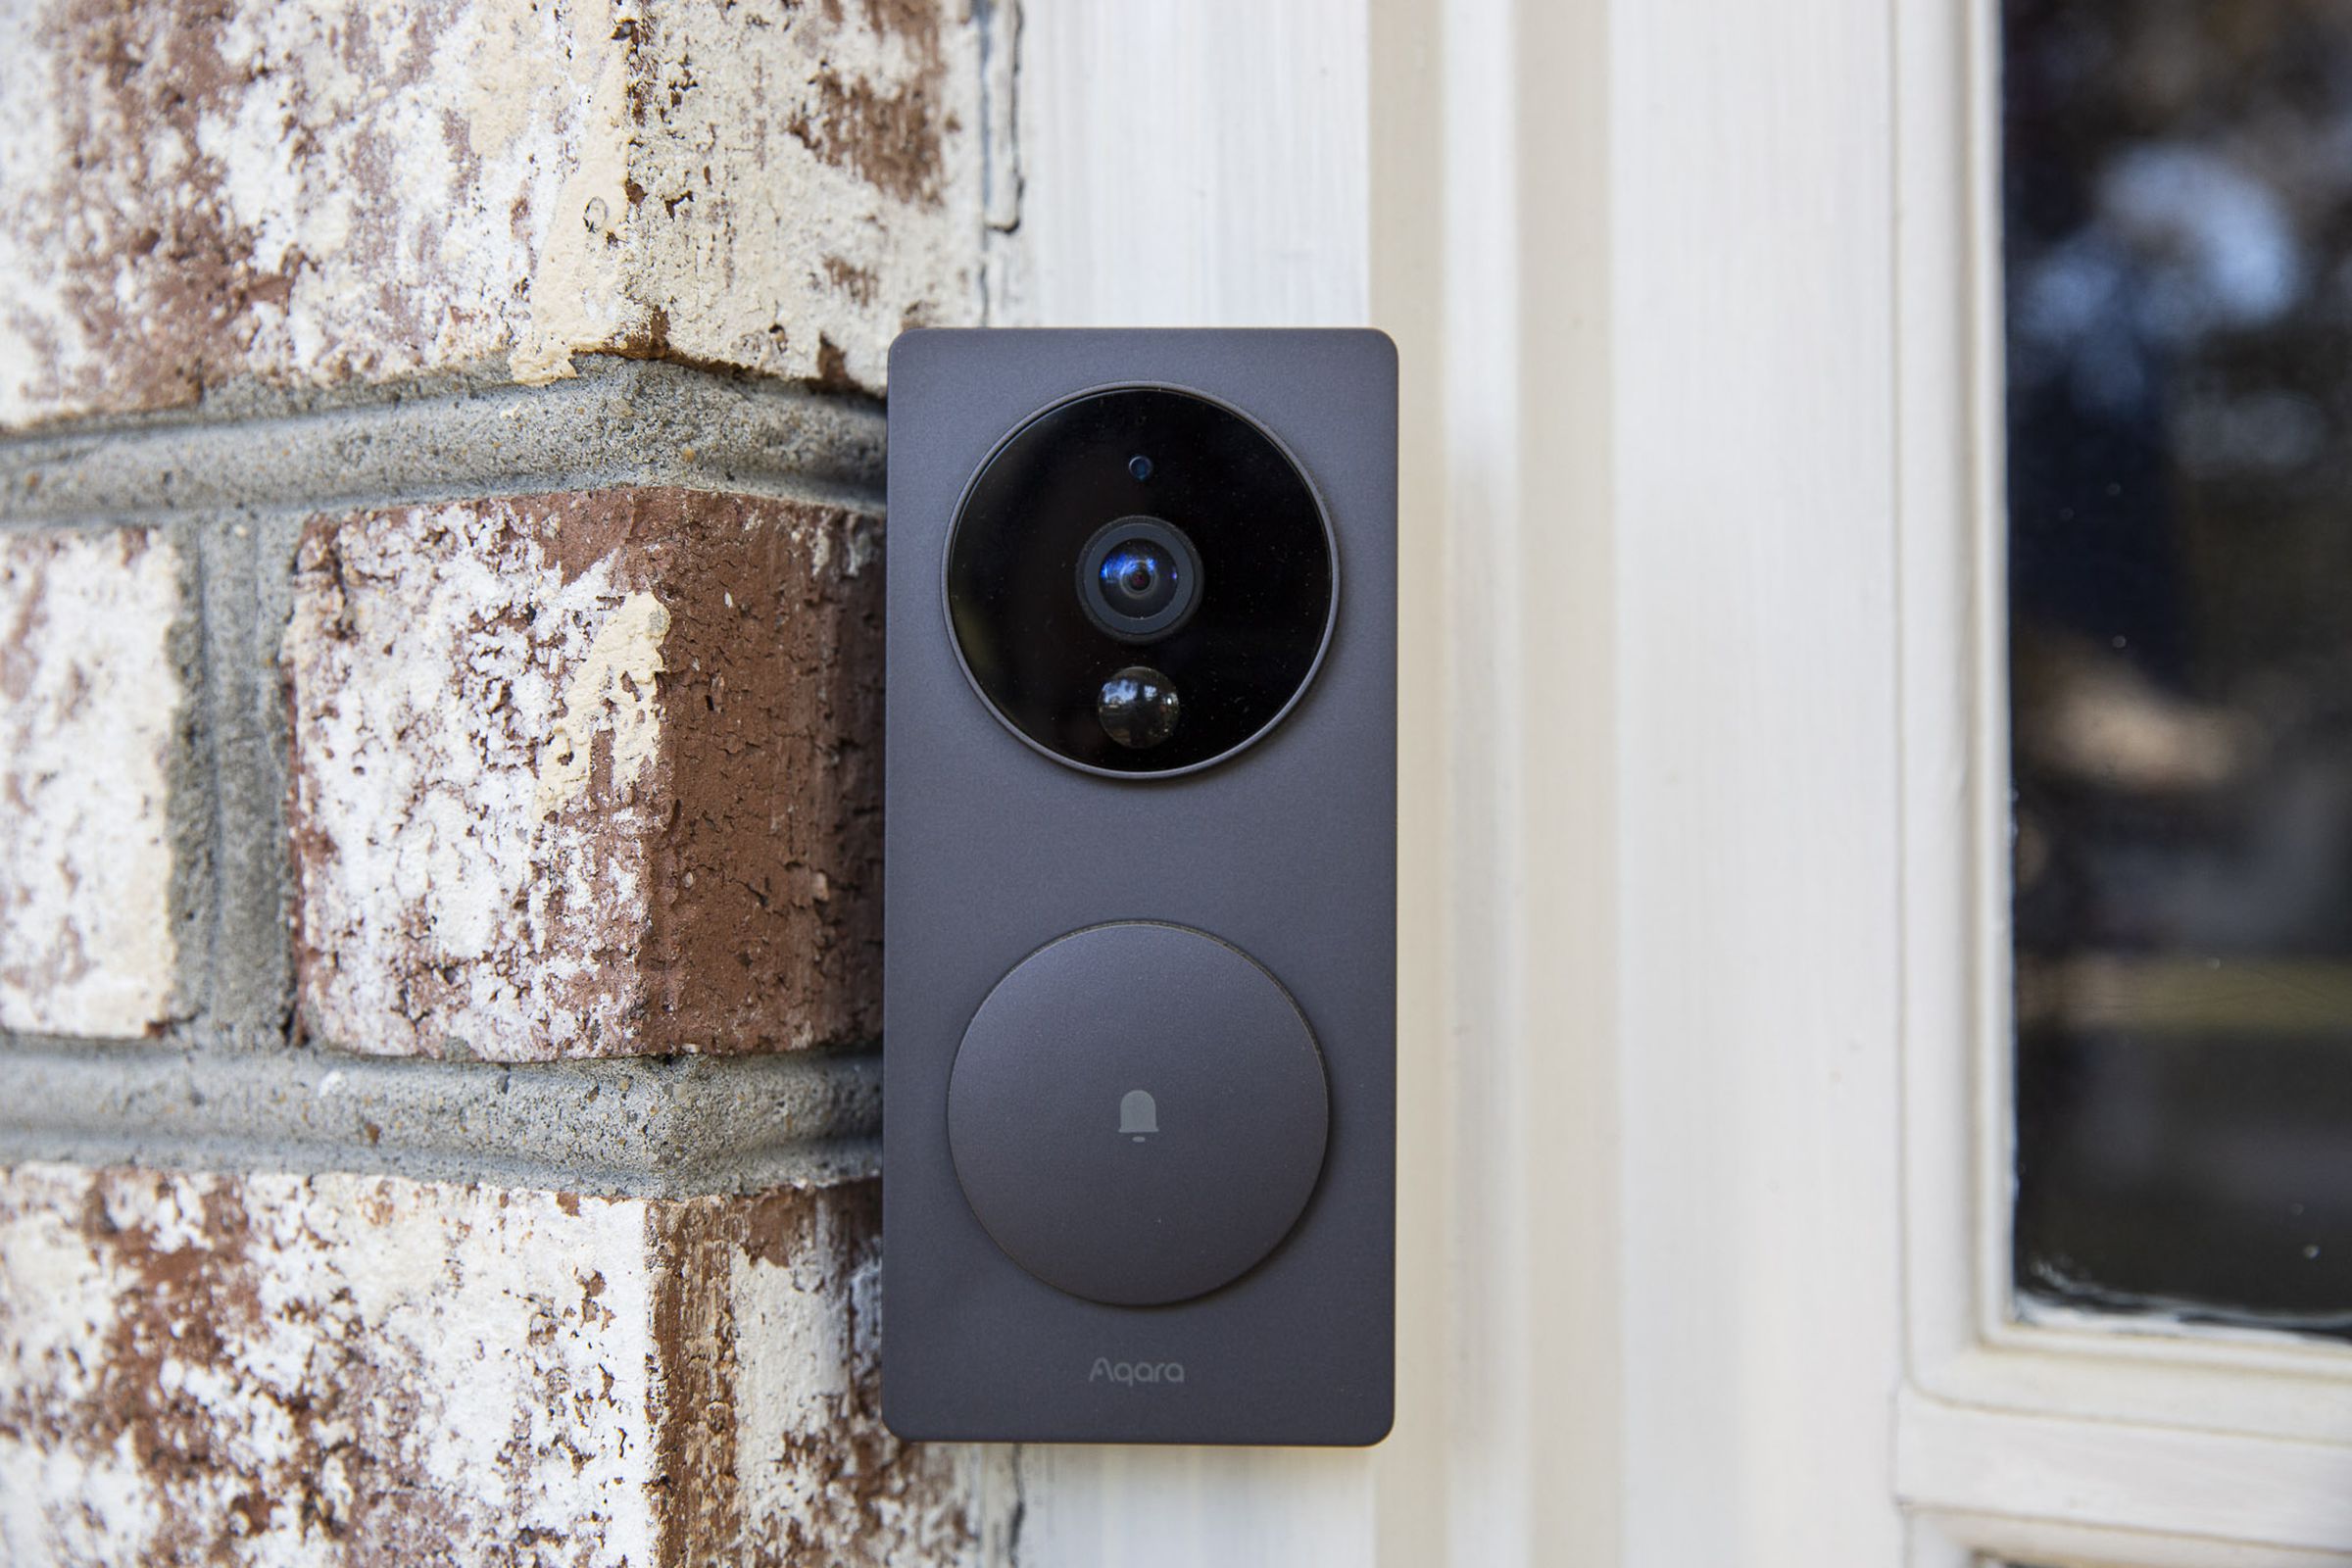 The Aqara G4 video doorbell can be battery-powered or wired and offers 24/7 continuous recording.